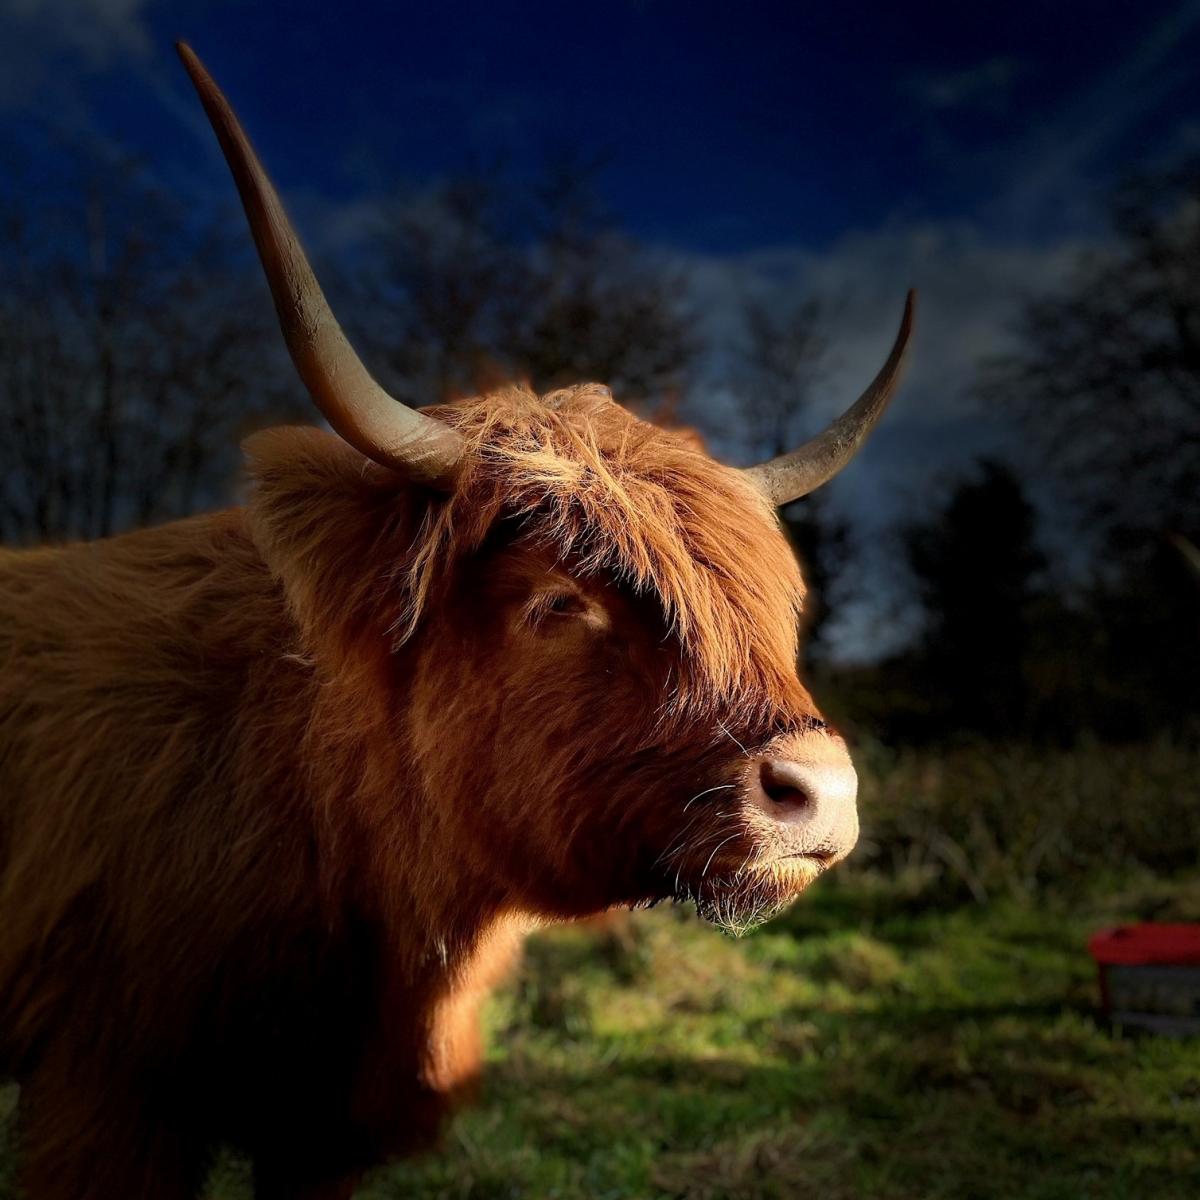 Andrew Prentice - Here’s Charlotte one of our 10 pure pedigree highland cattle from Maol Fold  Isle of Arran